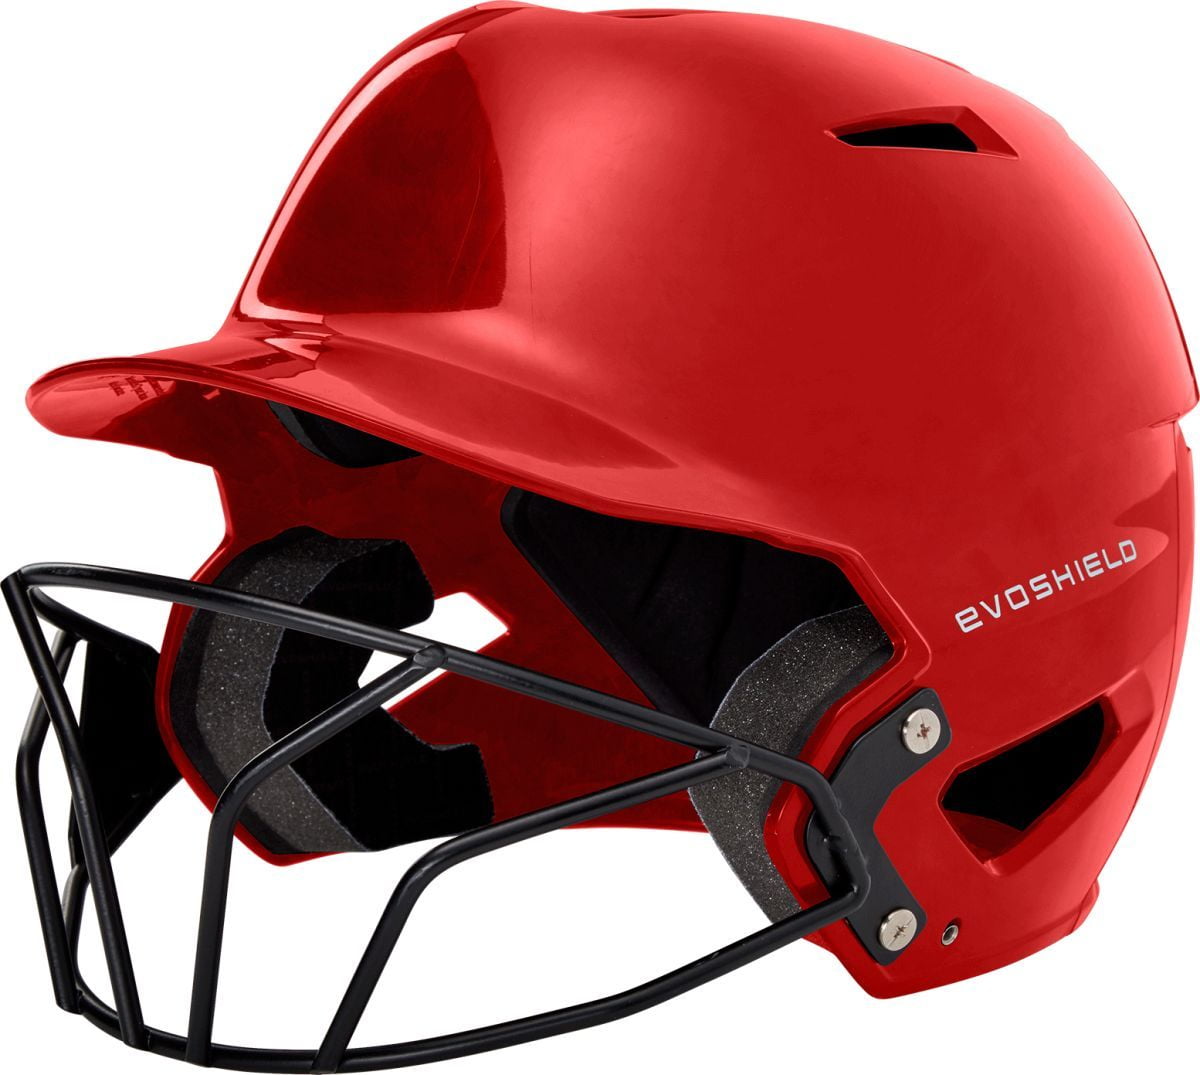 Details about   Rawlings Vapor Red Batters Helmet With Face Guard One Size 6.5-7.5 